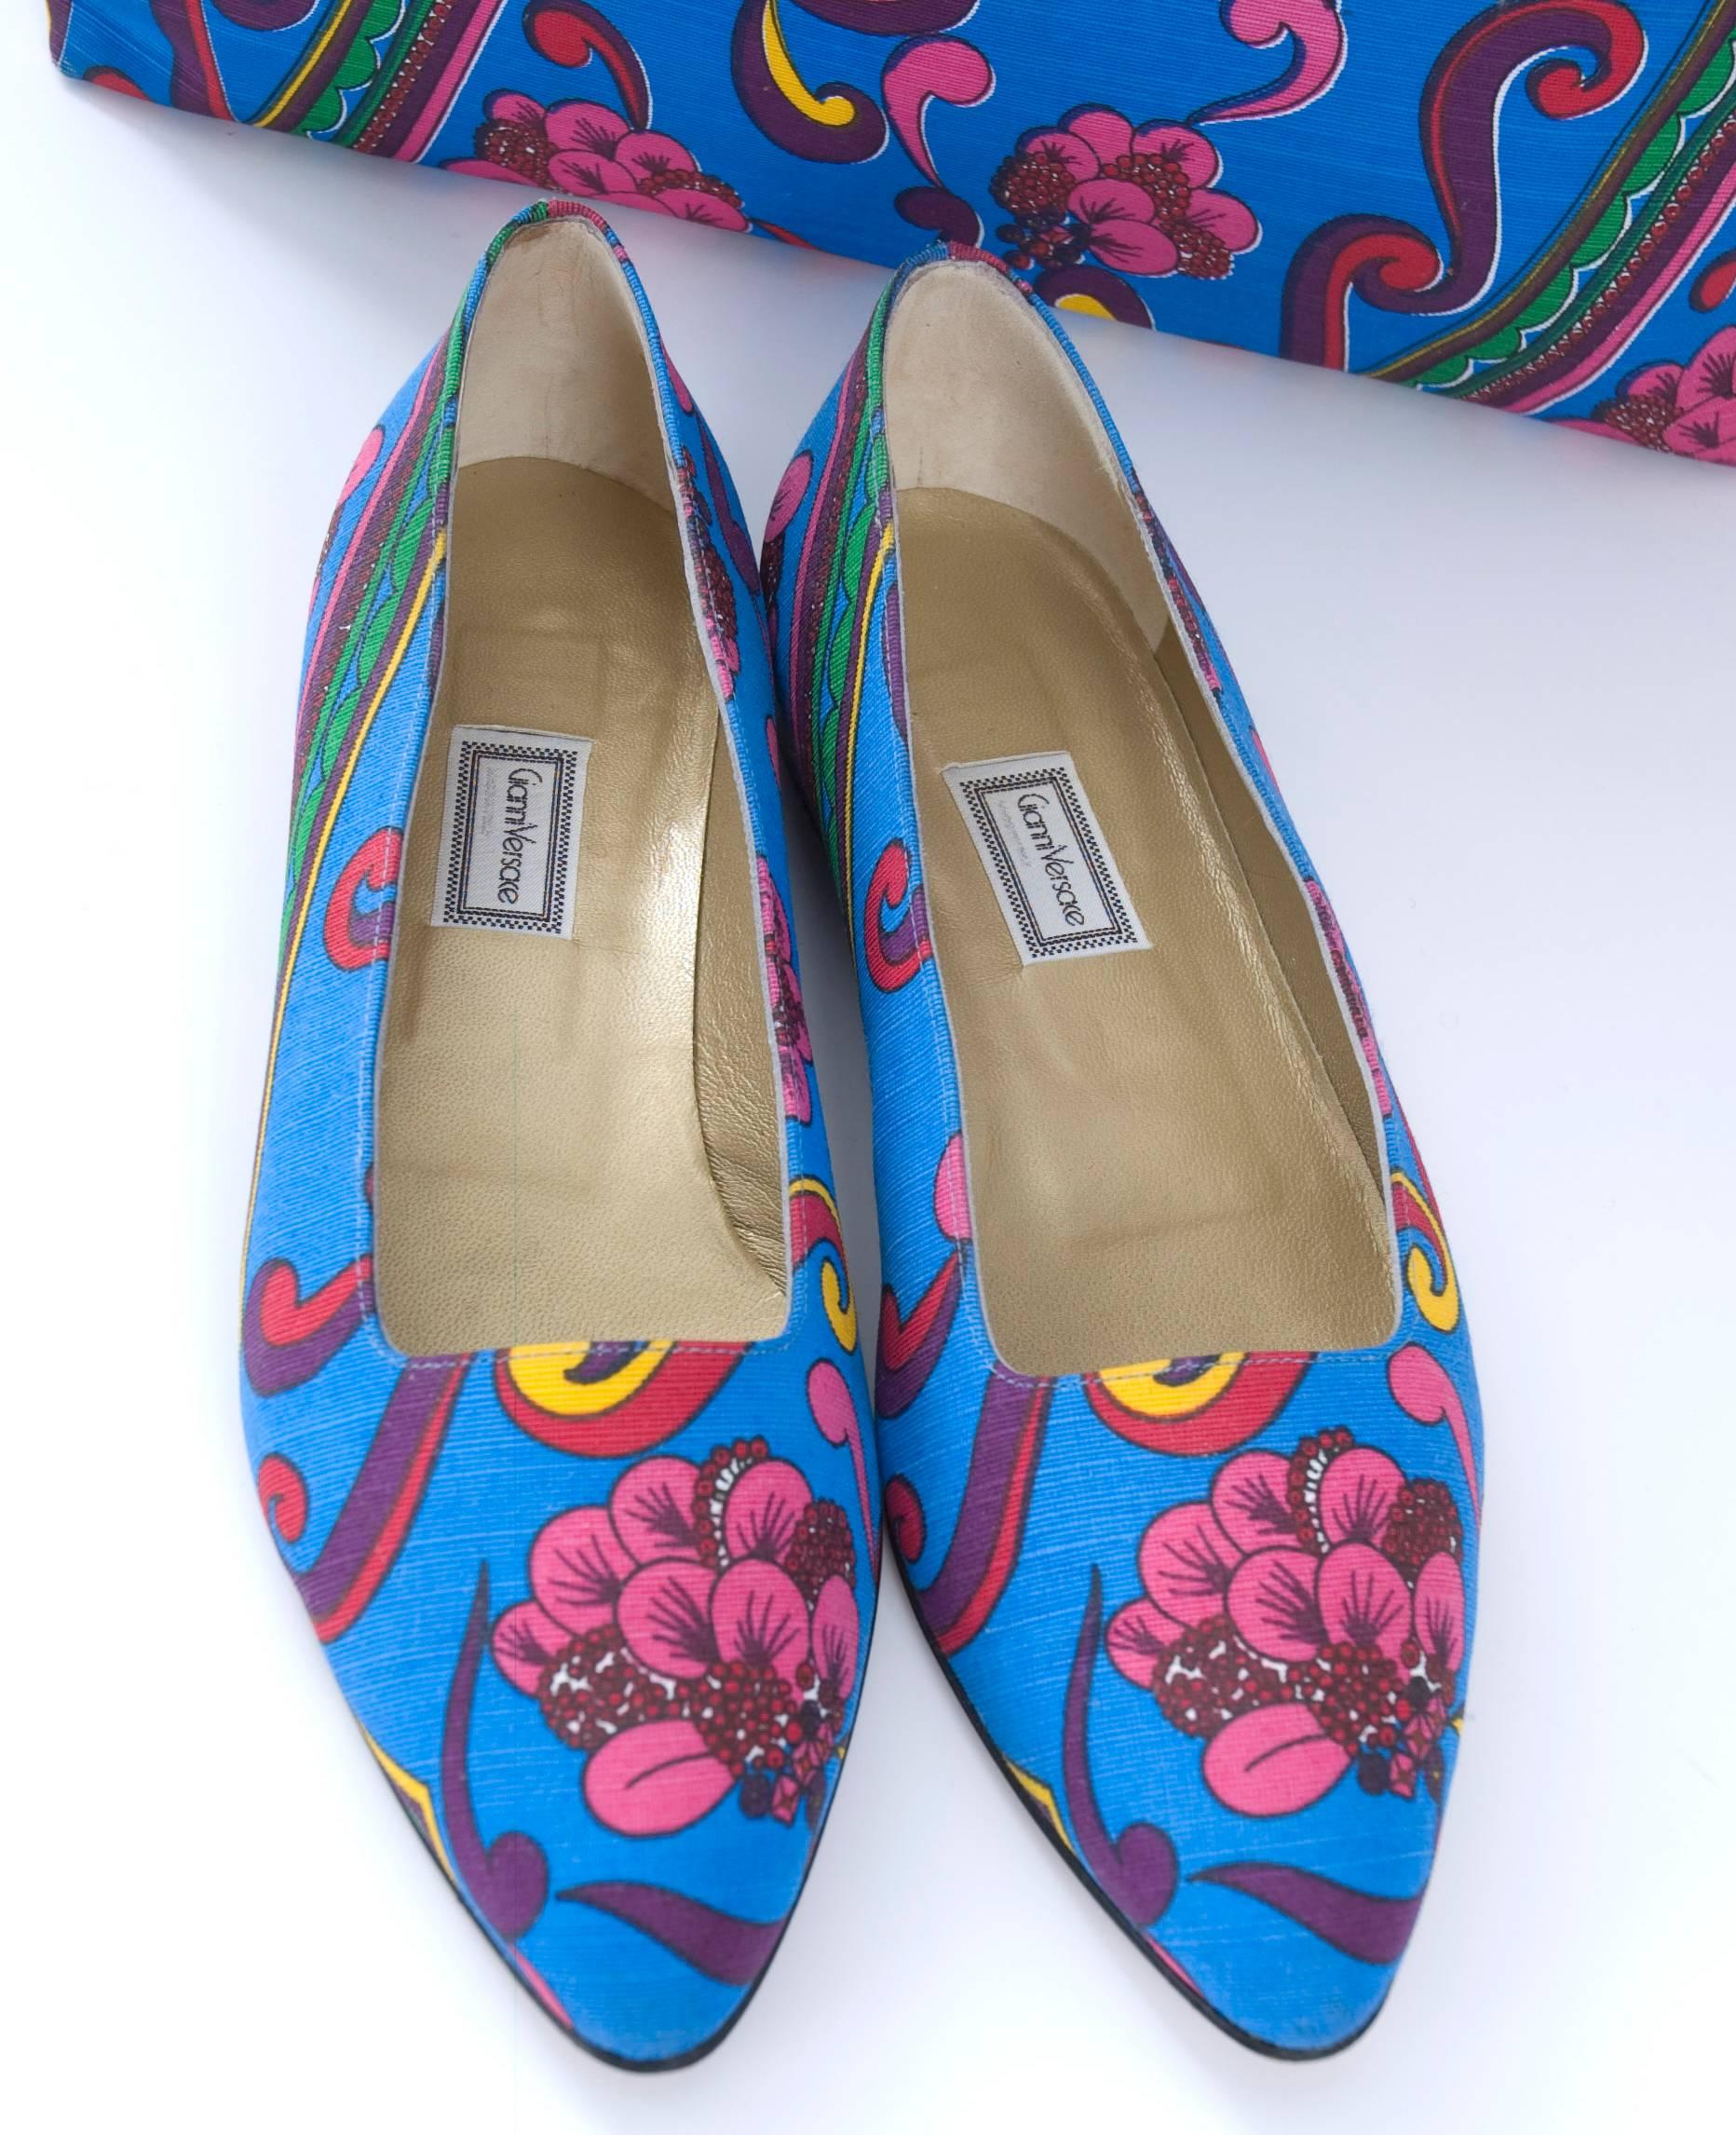 Vintage Gianni Versace Couture Purse and Shoes In Excellent Condition For Sale In Hamburg, Deutschland